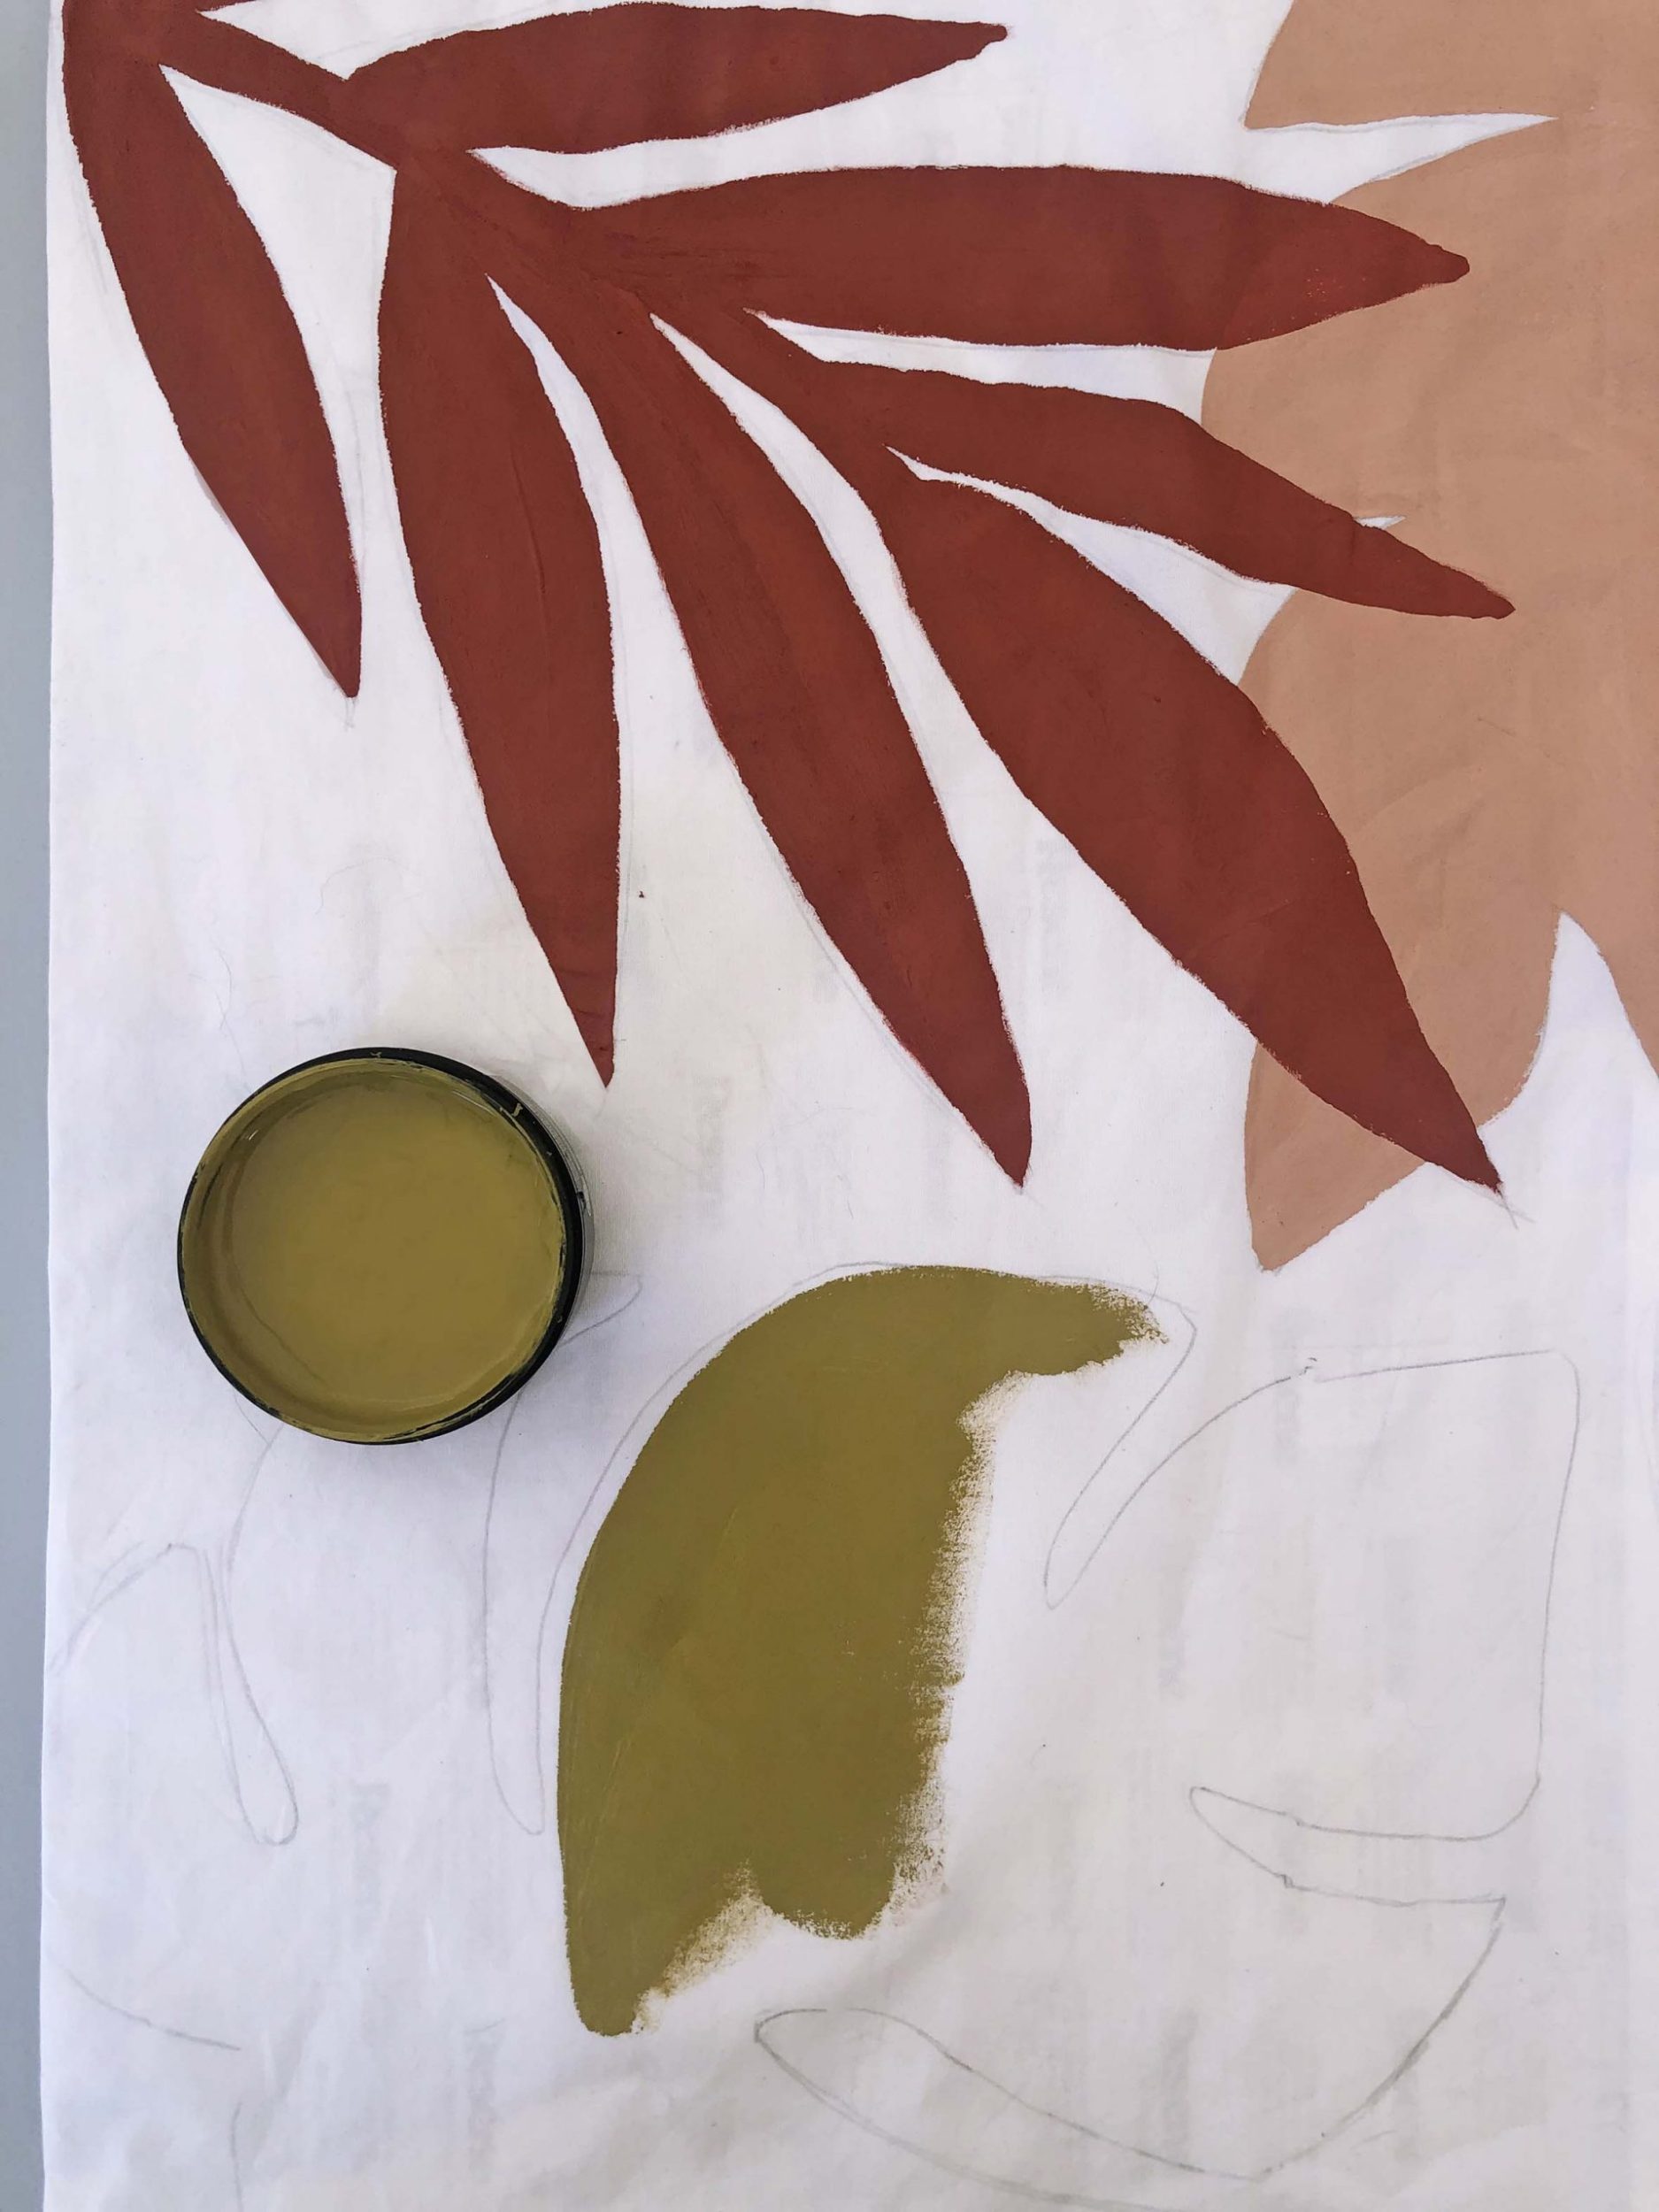 Leaf outlines being painted on white pillows